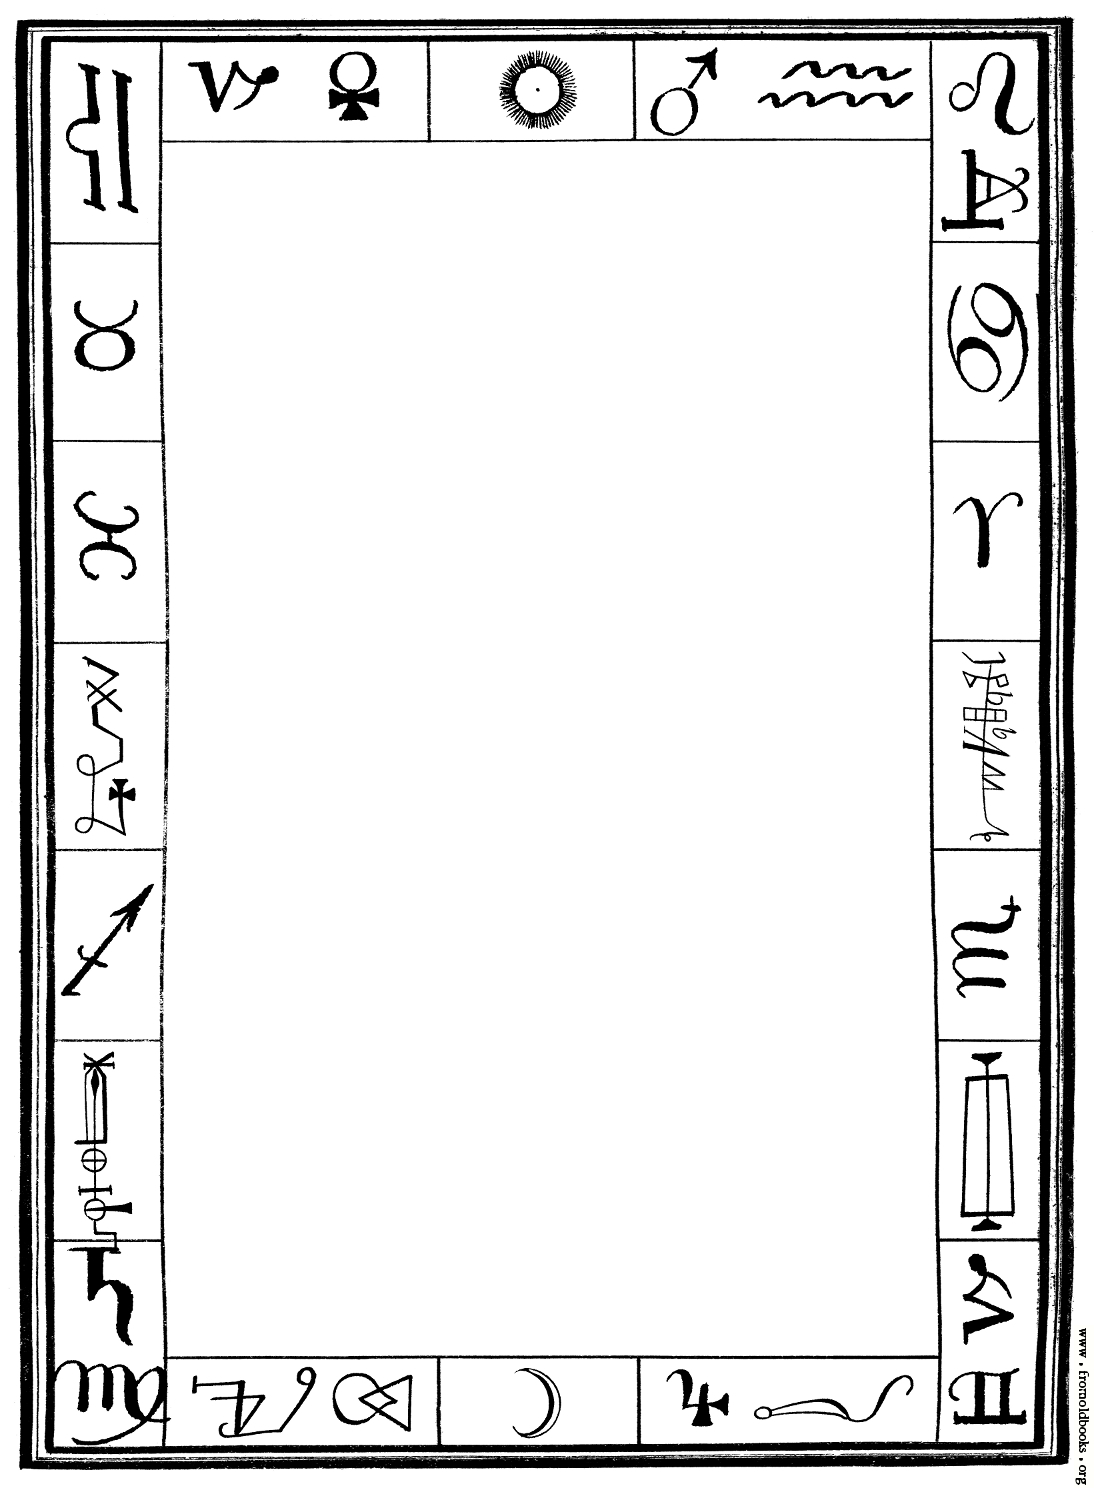 Full Page Border With Alchemical And Zodiacal Symbols and Signs